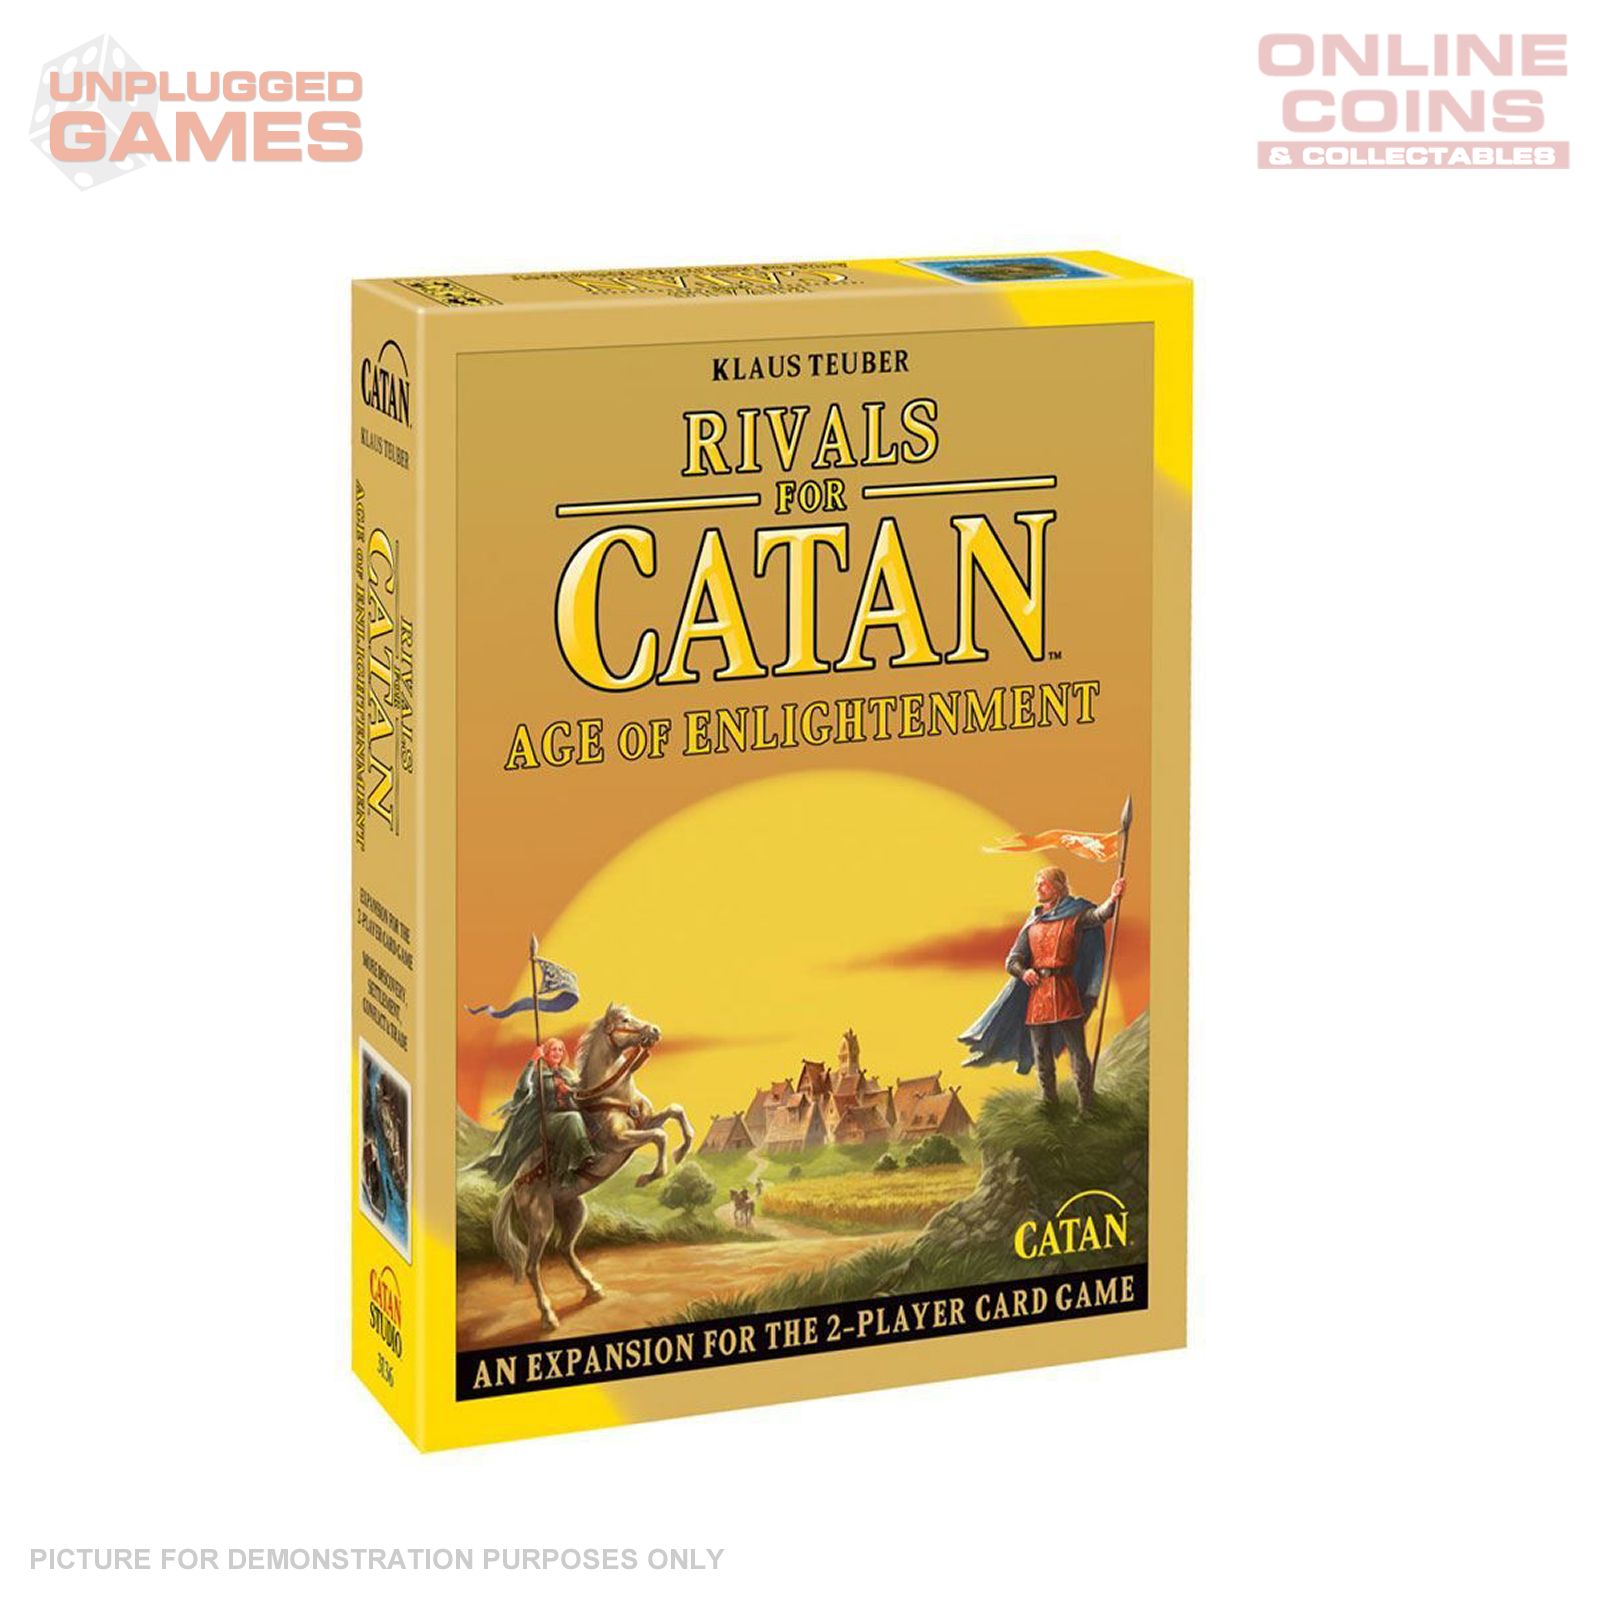 Catan - Age of Enlightenment Expansion